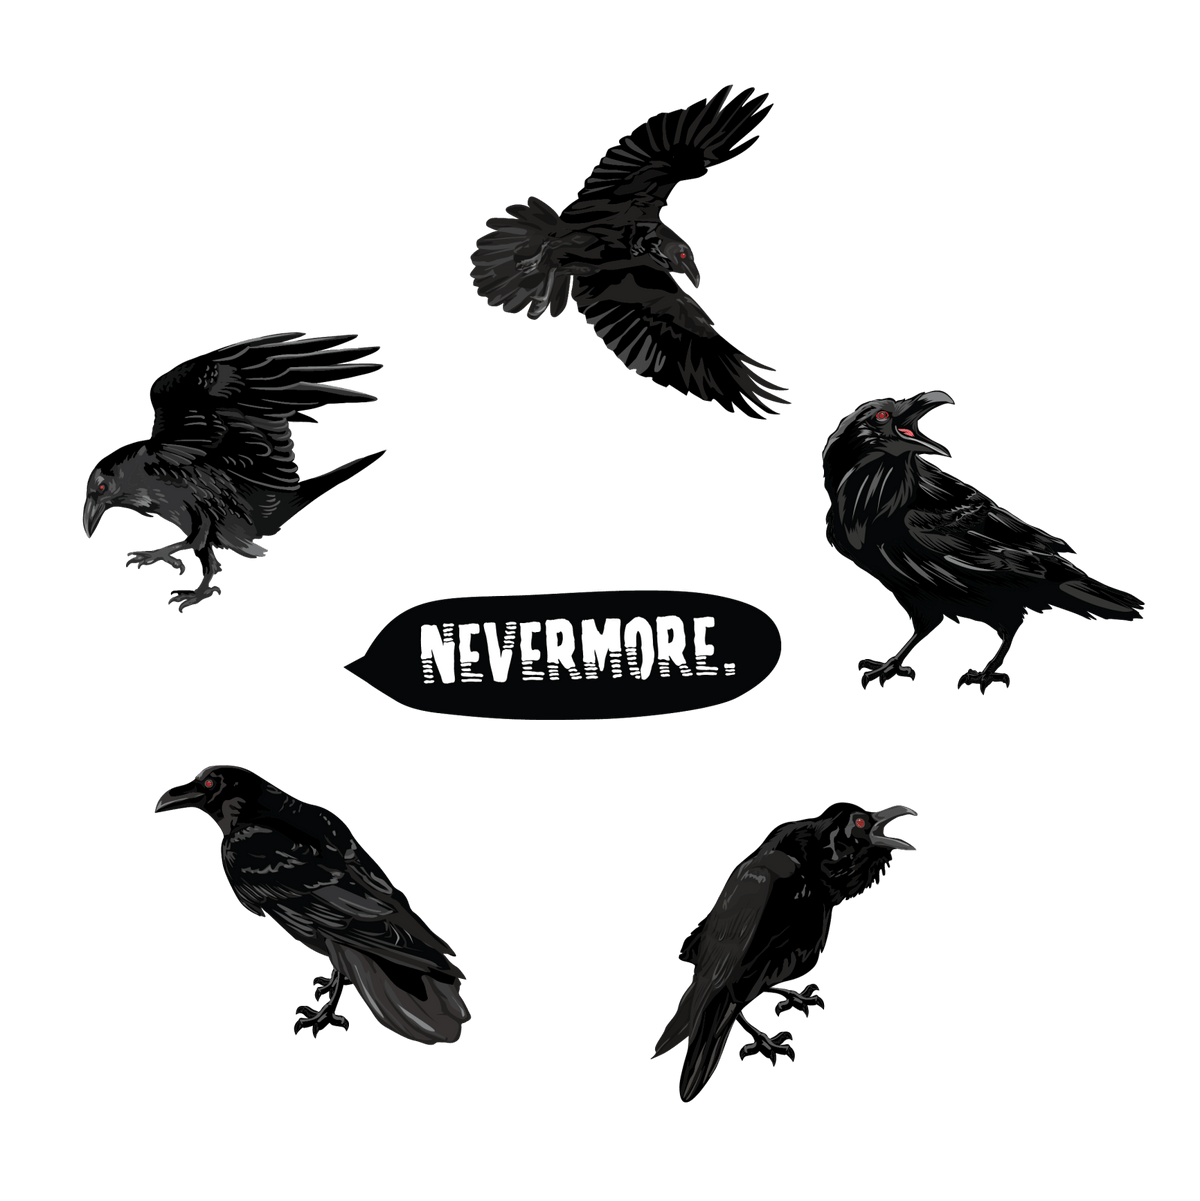 Six Red-Eyed Ravens in various poses with the word "nevermore." displayed on a green background, inspired by Edgar Allen Poe's poem.